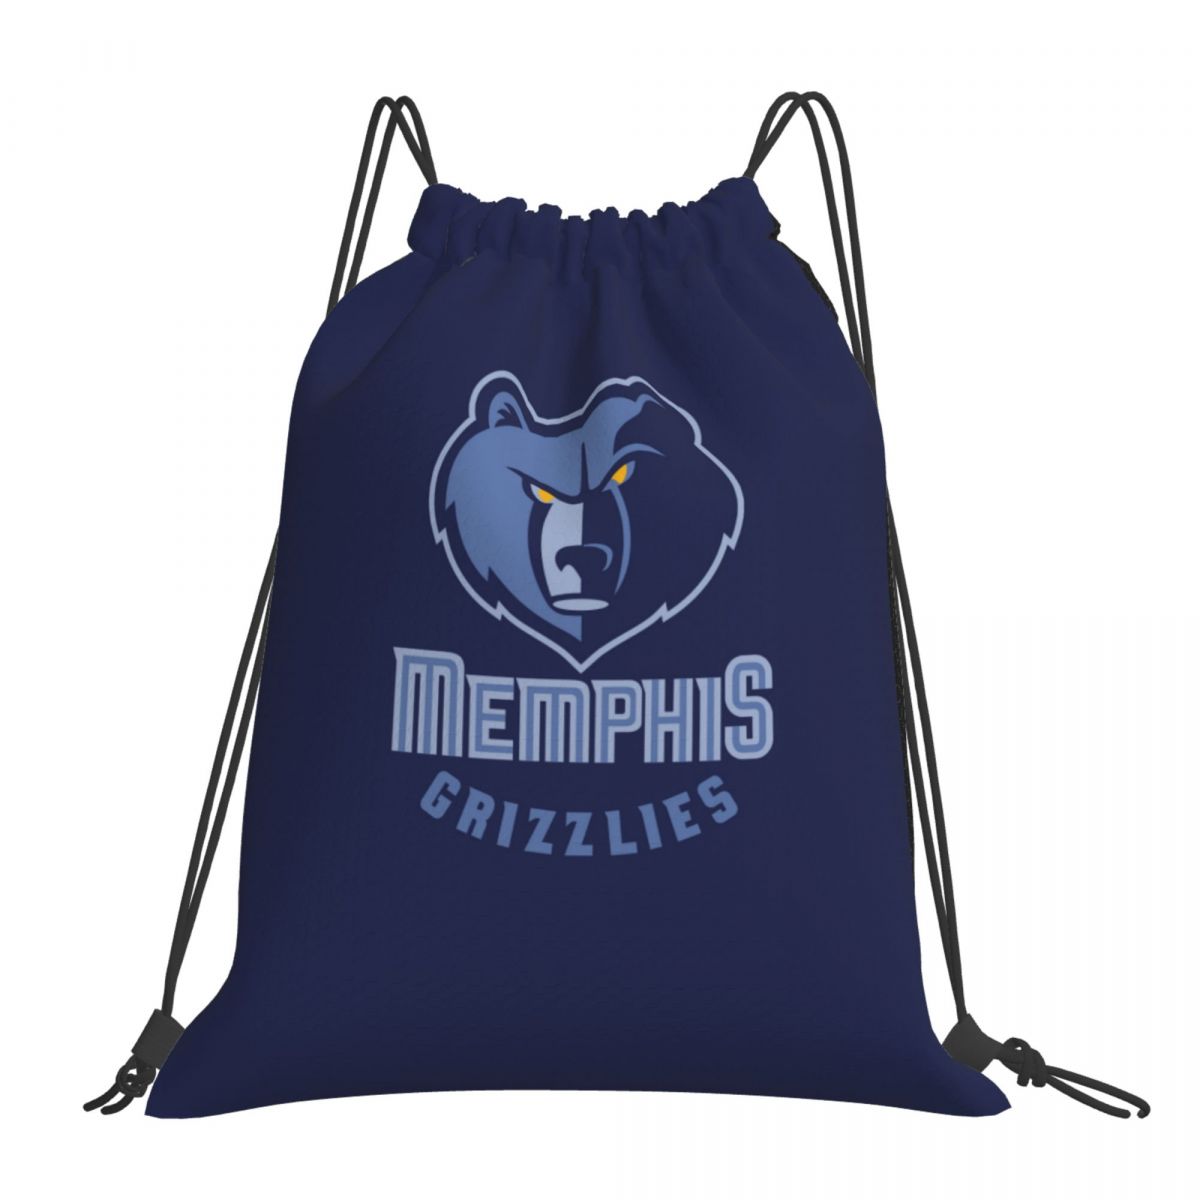 Memphis Grizzlies Navy Drawstring Bags for School Gym